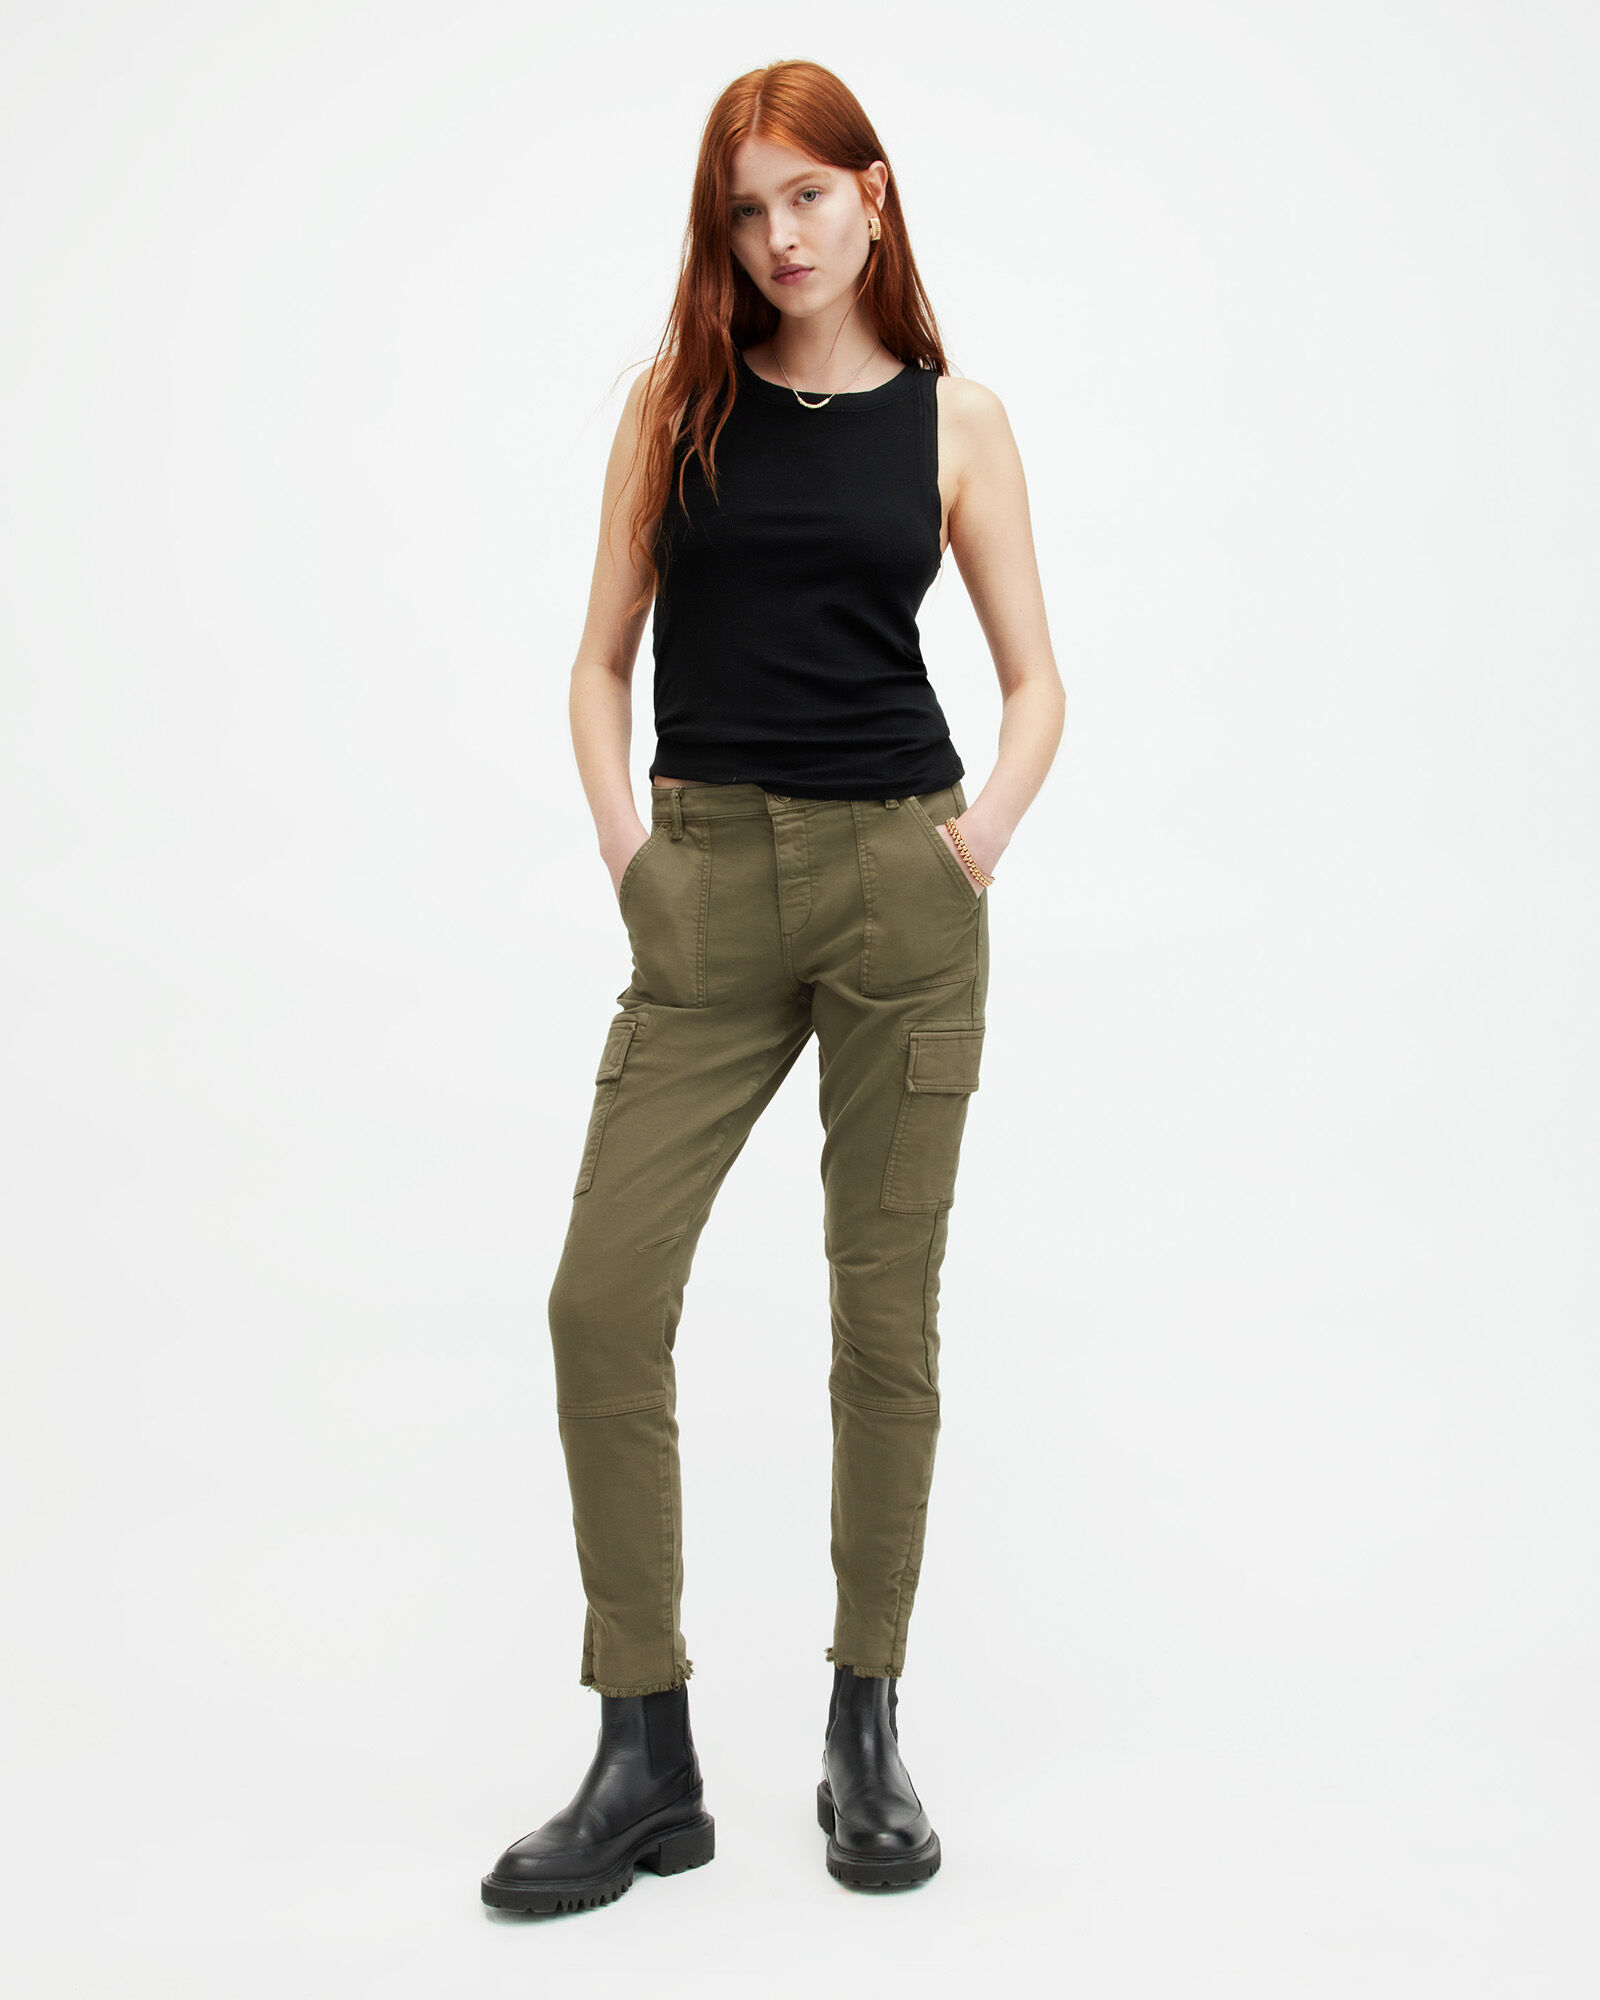 Cargo Leggings with Pockets for Women Casual Skinny Pockets High Waist Pants  Stretch Bound Feet Ripstop Cargo Trouser Army Green at Amazon Women's  Clothing store